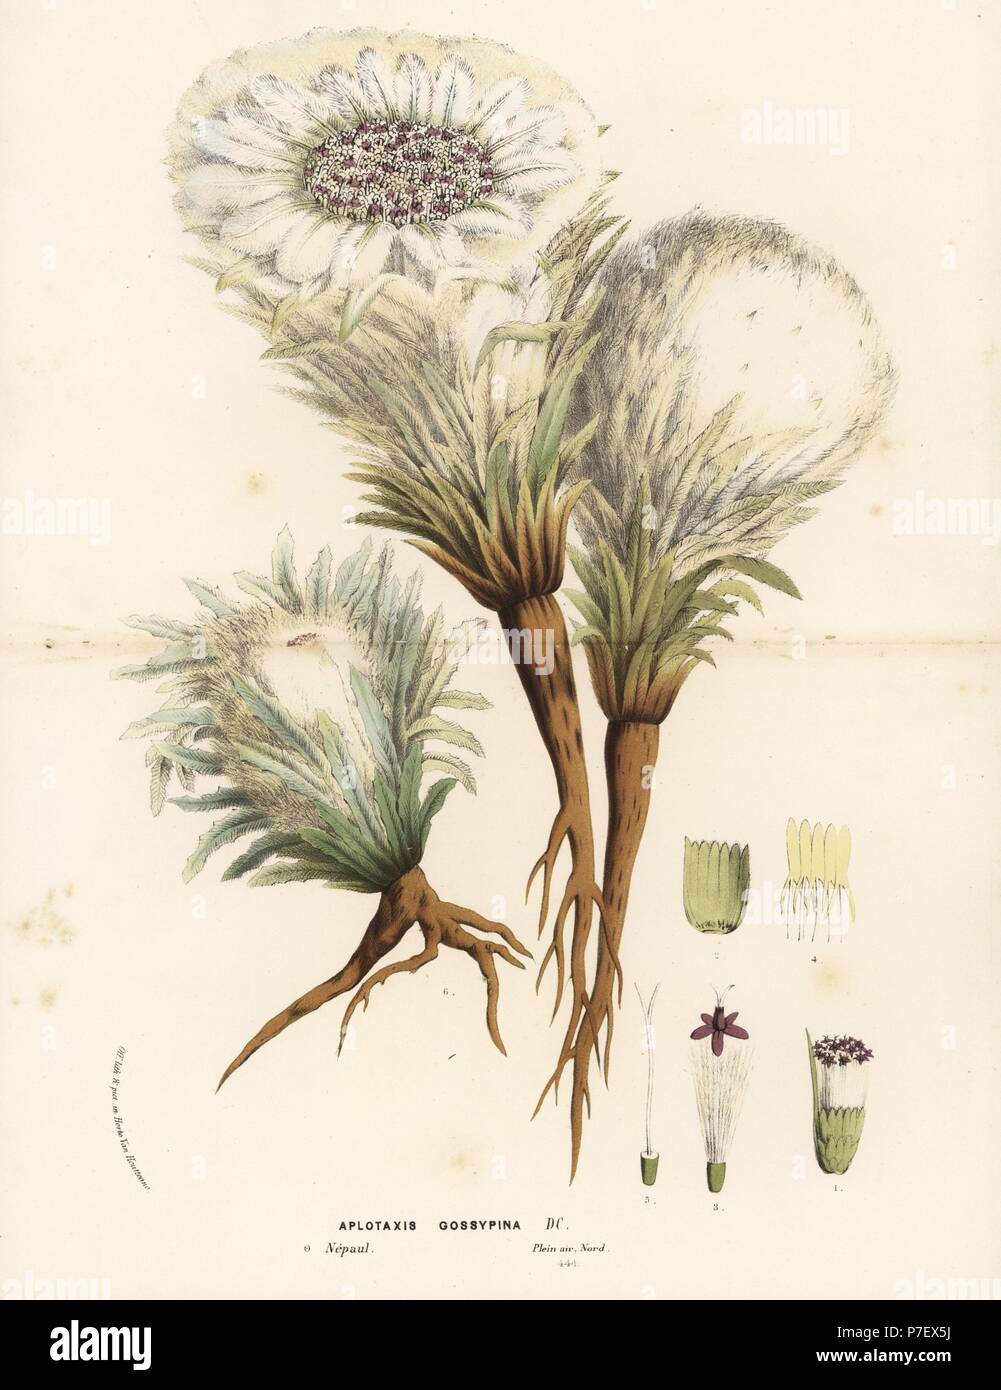 Snowball plant, Saussurea gossypiphora (Aplotaxis gossypina). Handcoloured lithograph from Louis van Houtte and Charles Lemaire's Flowers of the Gardens and Hothouses of Europe, Flore des Serres et des Jardins de l'Europe, Ghent, Belgium, 1862-65. Stock Photo